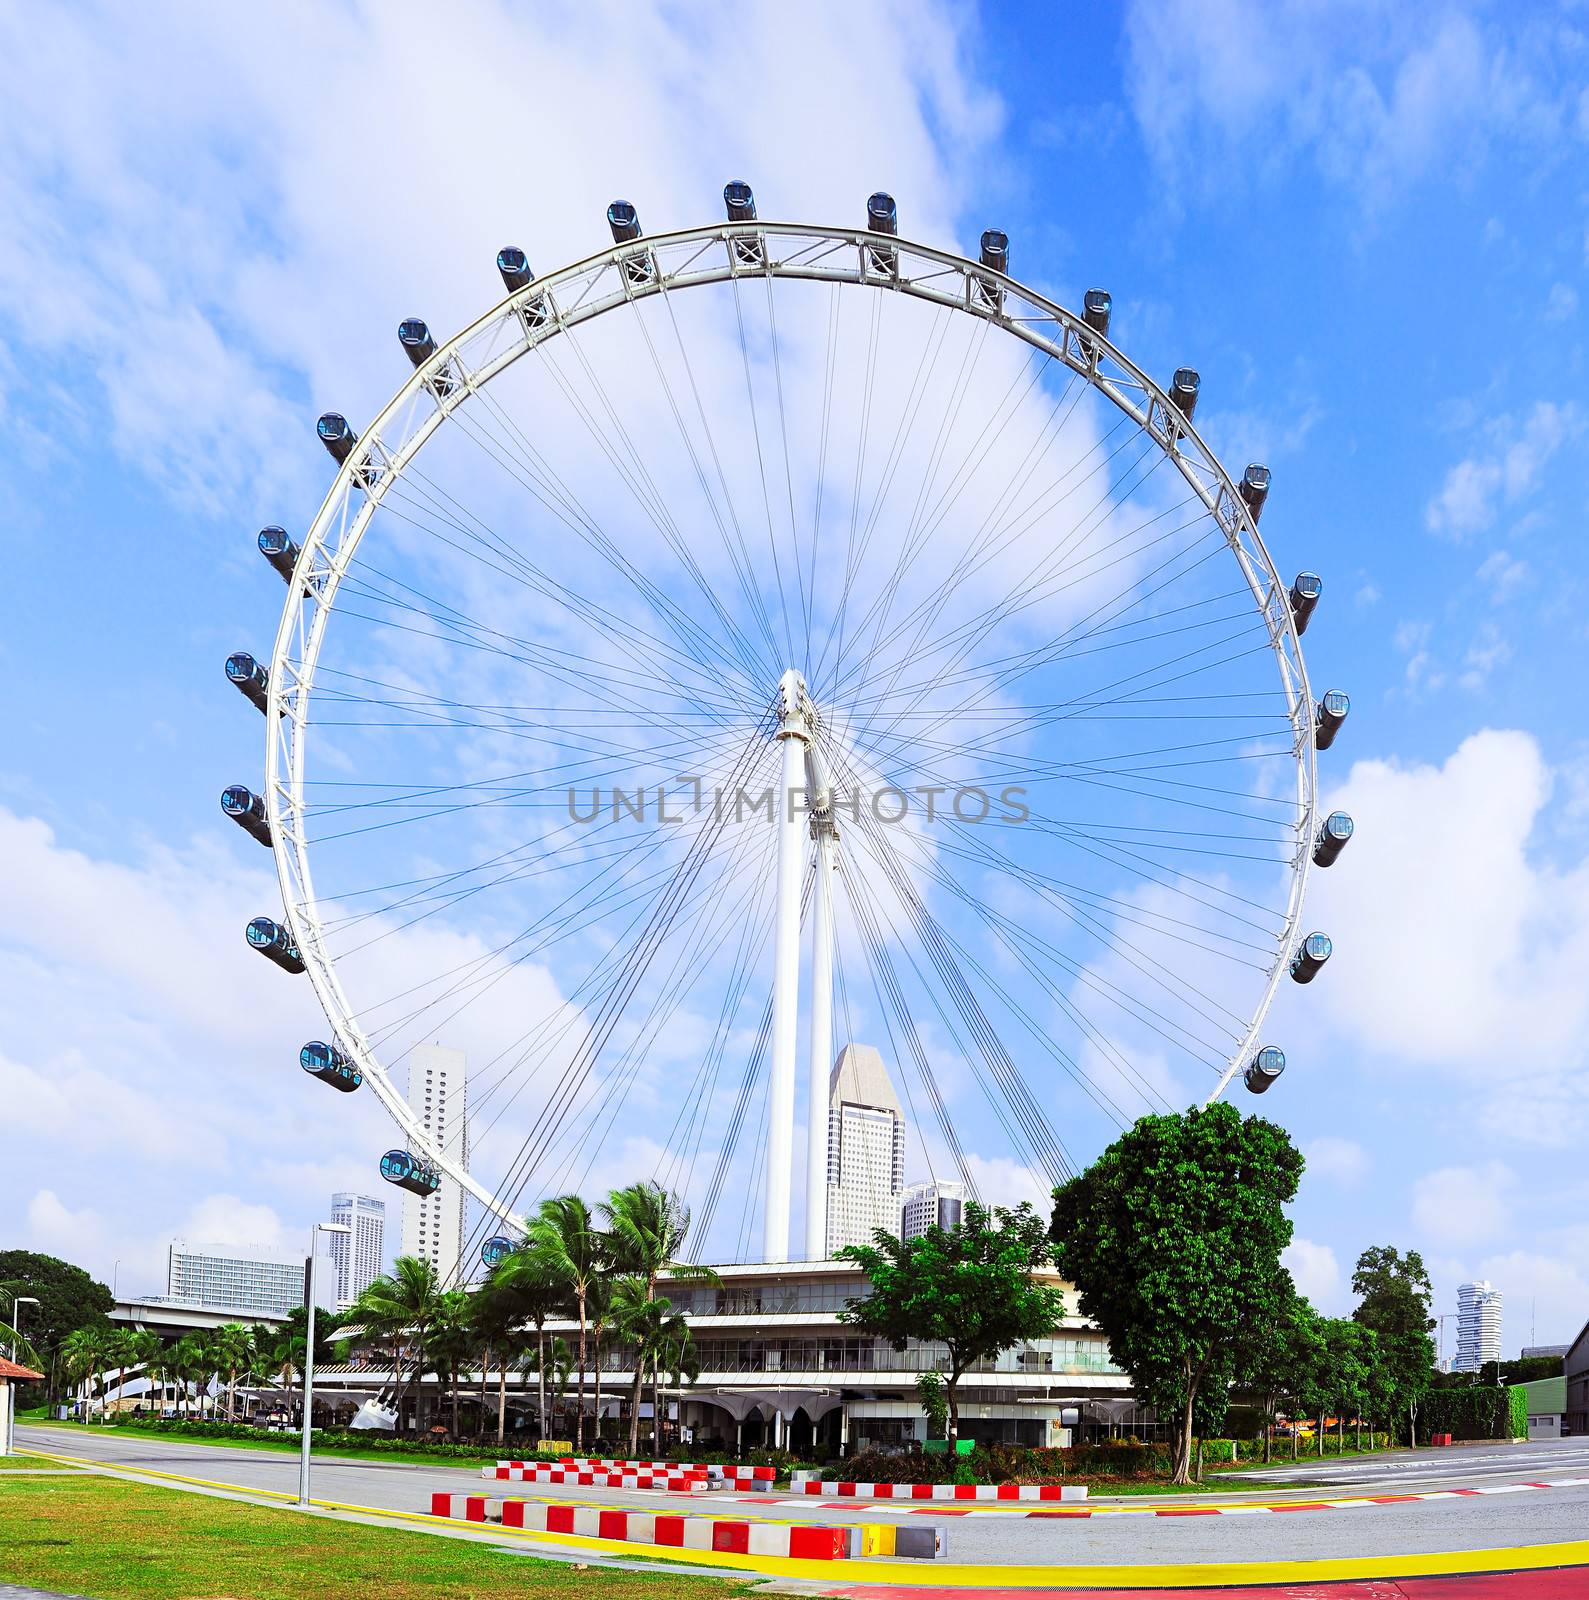 Singapore Flyer  - the Largest Ferris Wheel in the World